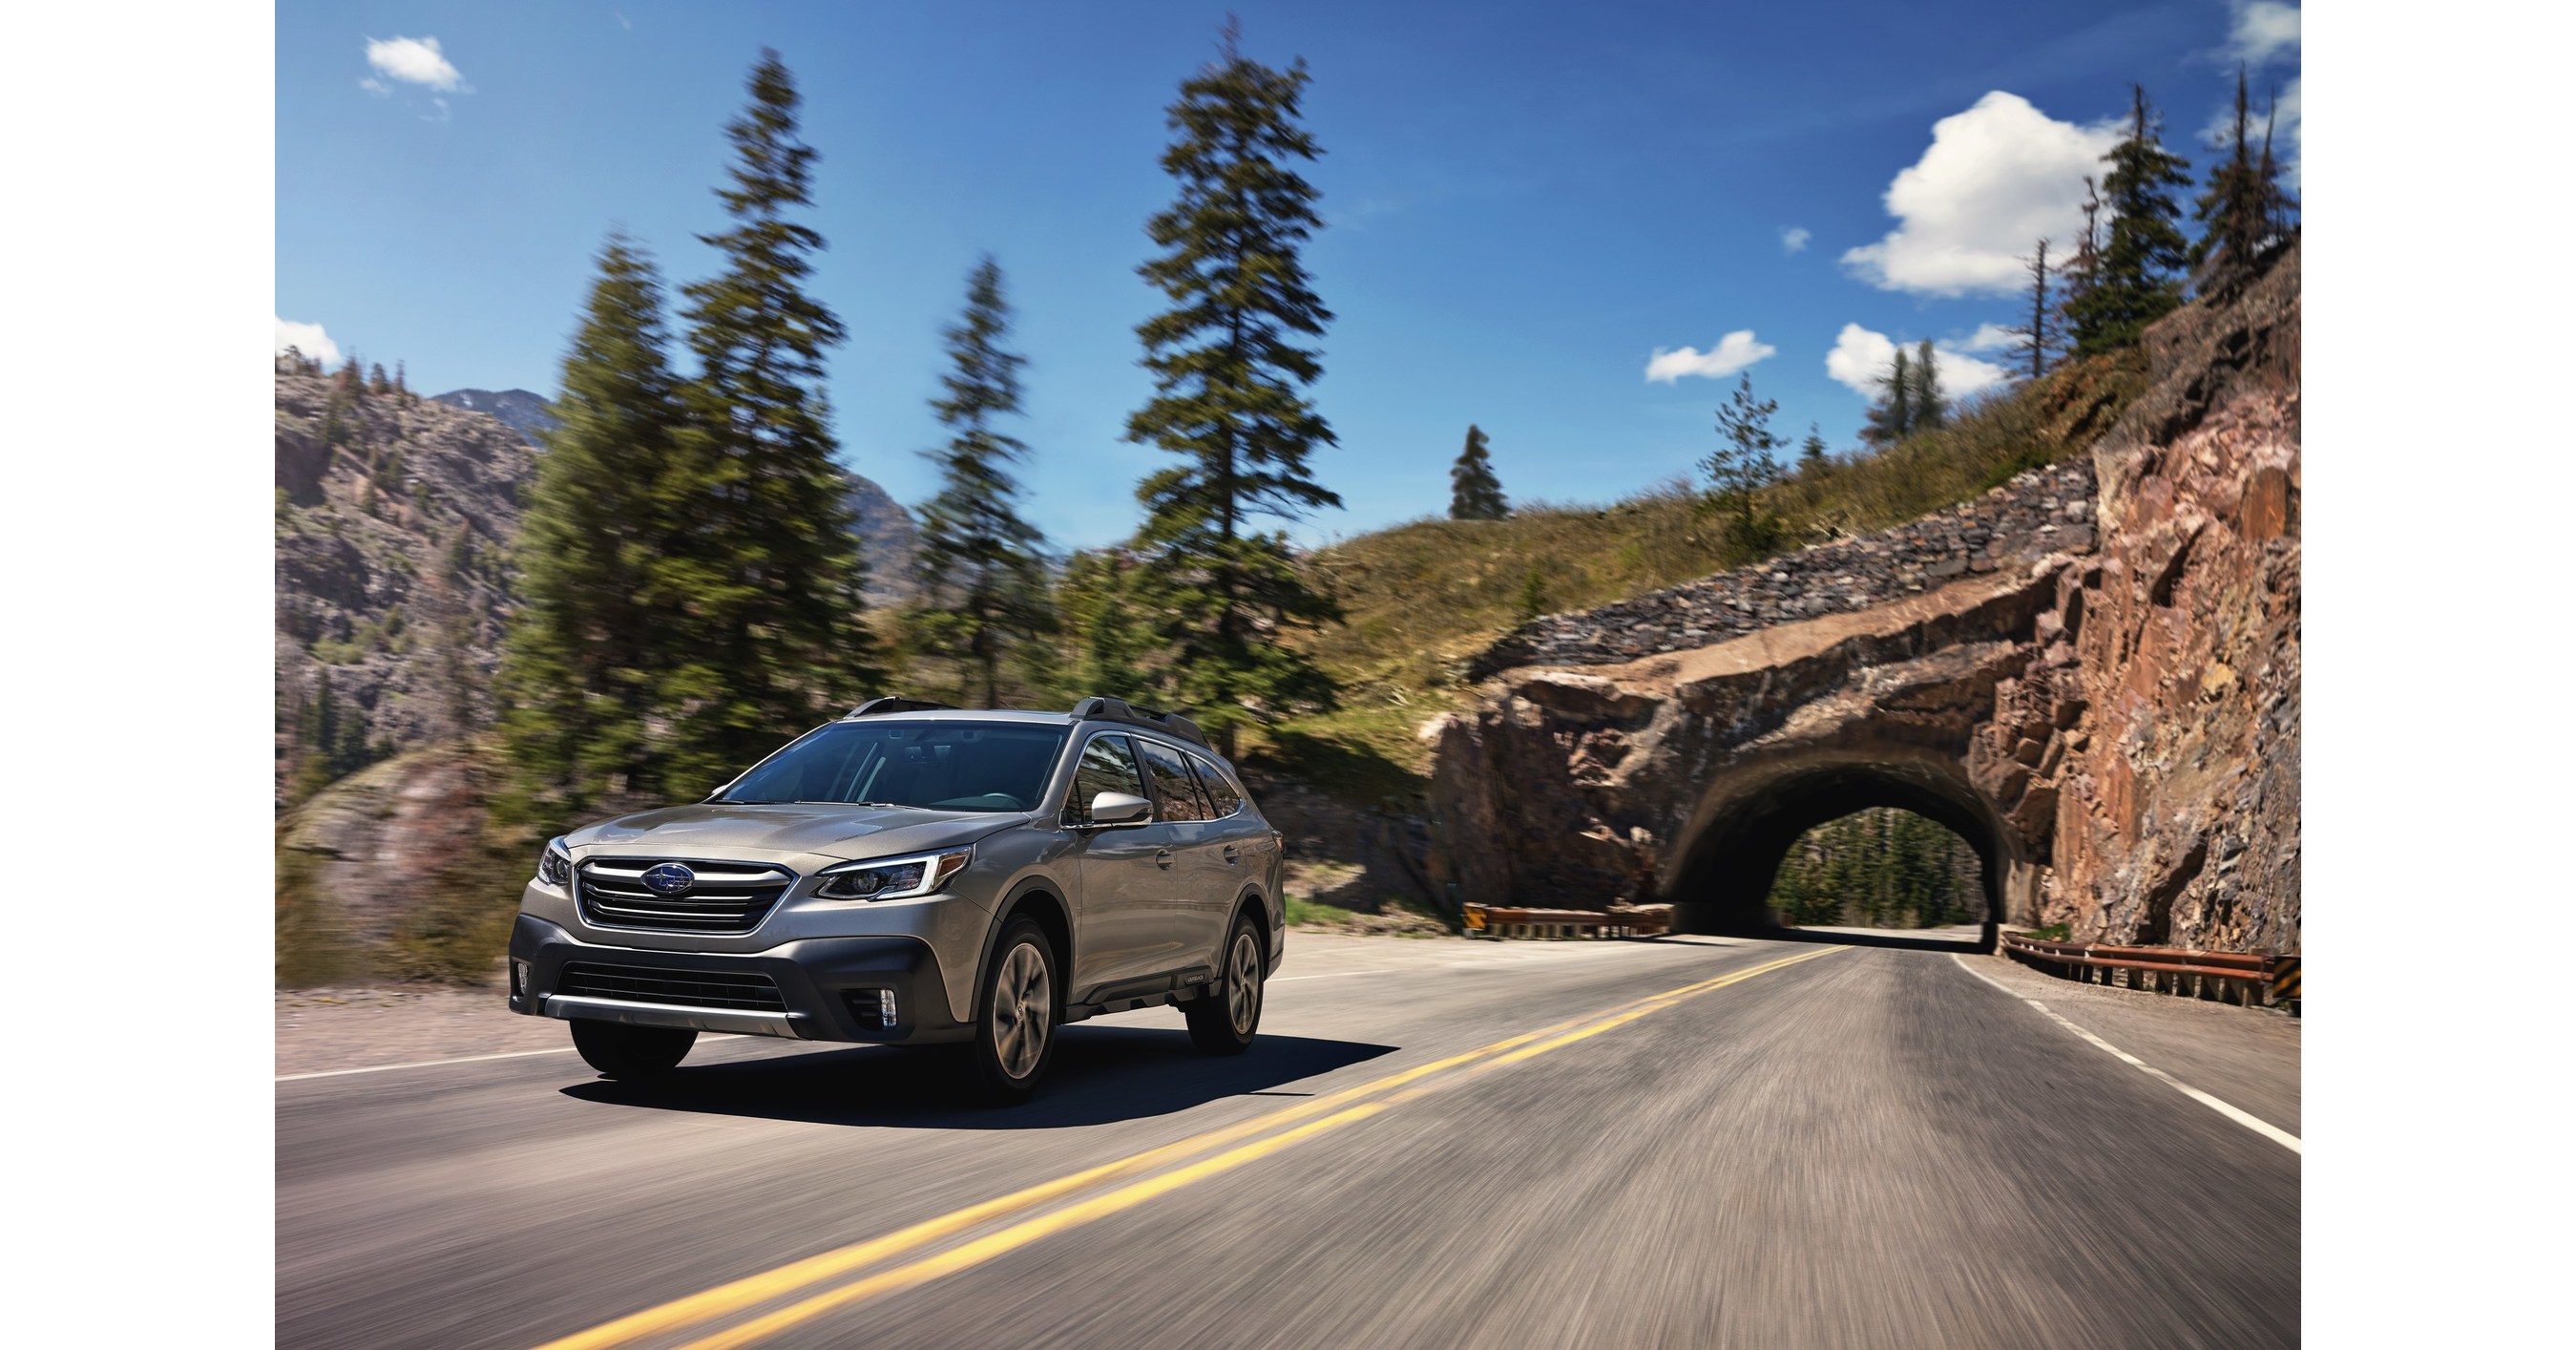 Subaru Announces Pricing For 2020 Legacy And Outback Models